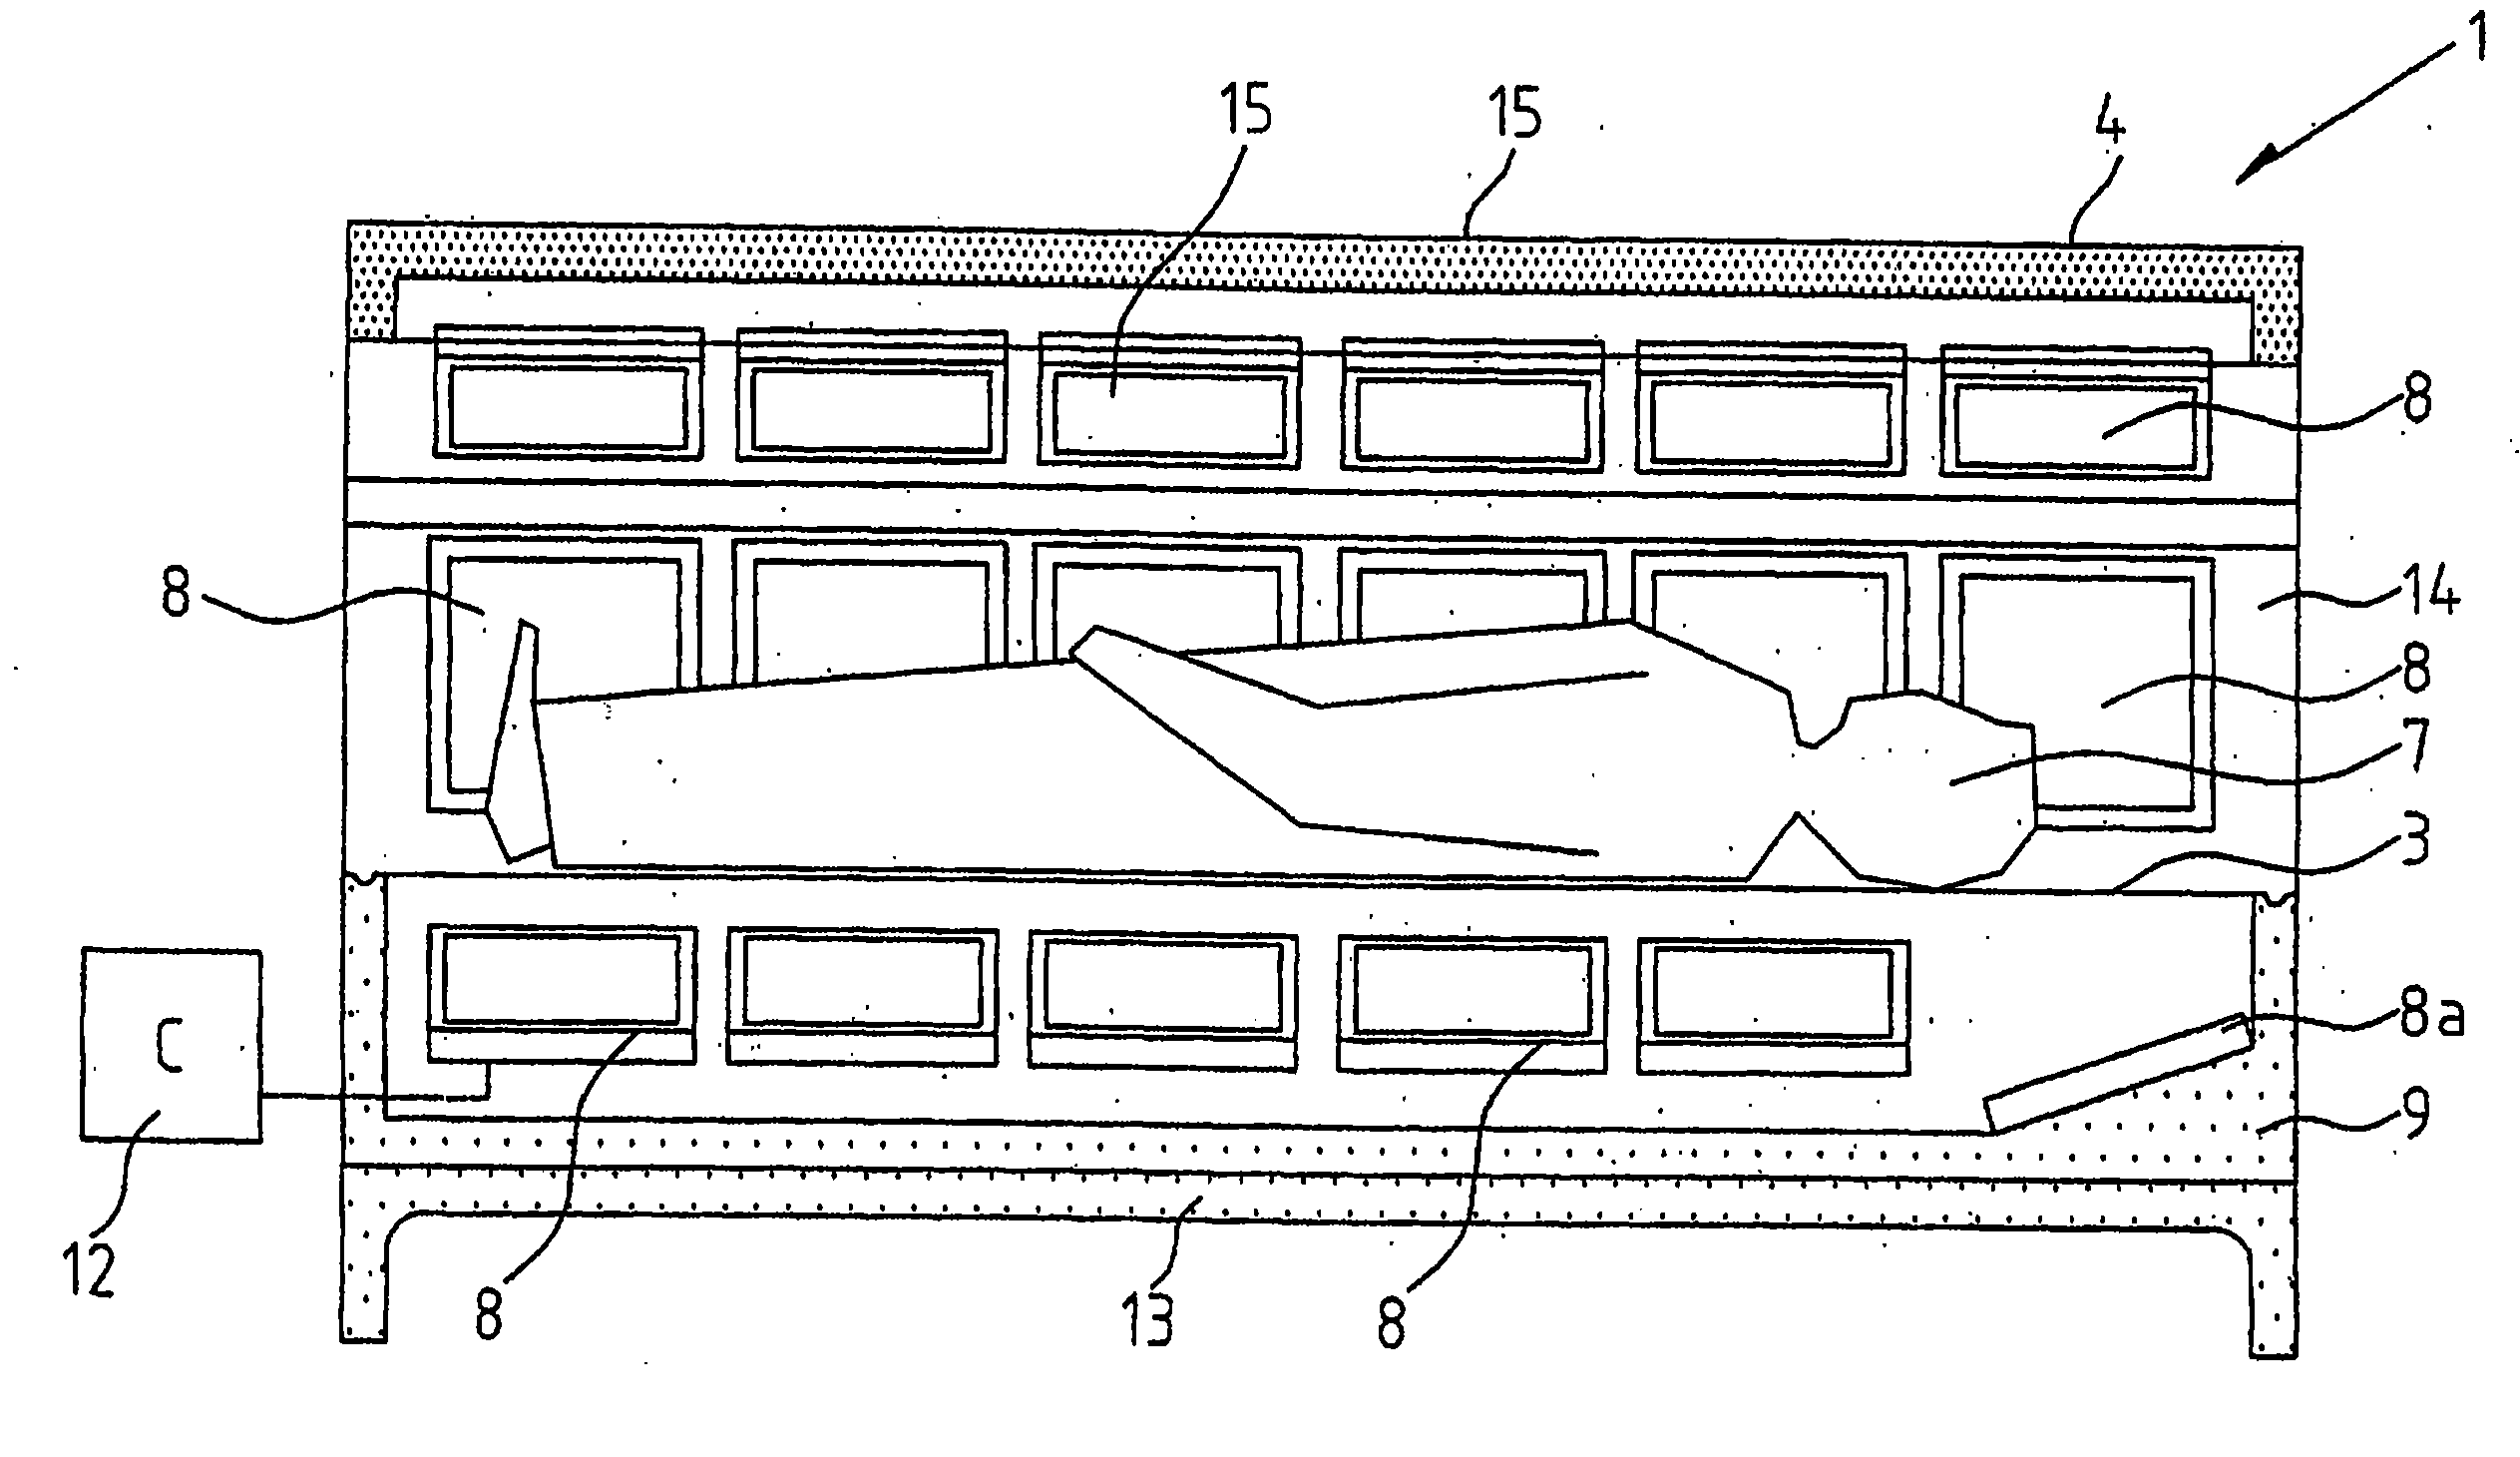 Apparatus for Photodynamic Therapy